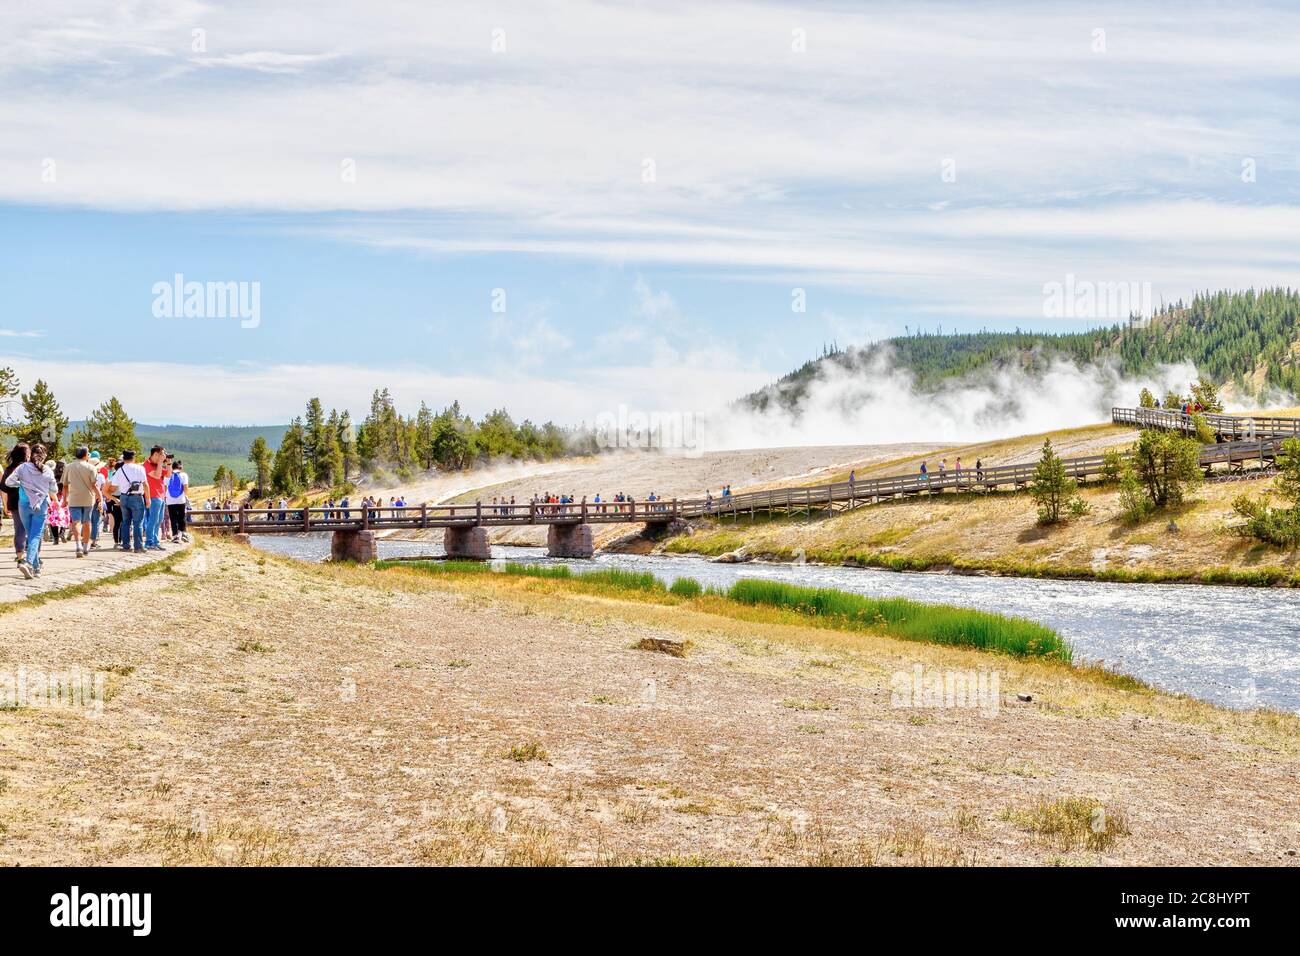 Wyoming, USA - Aug. 24, 2019: Visitors approach the footbridge to Grand Prismatic Spring in Yellowstone National Park with steam rising from the therm Stock Photo